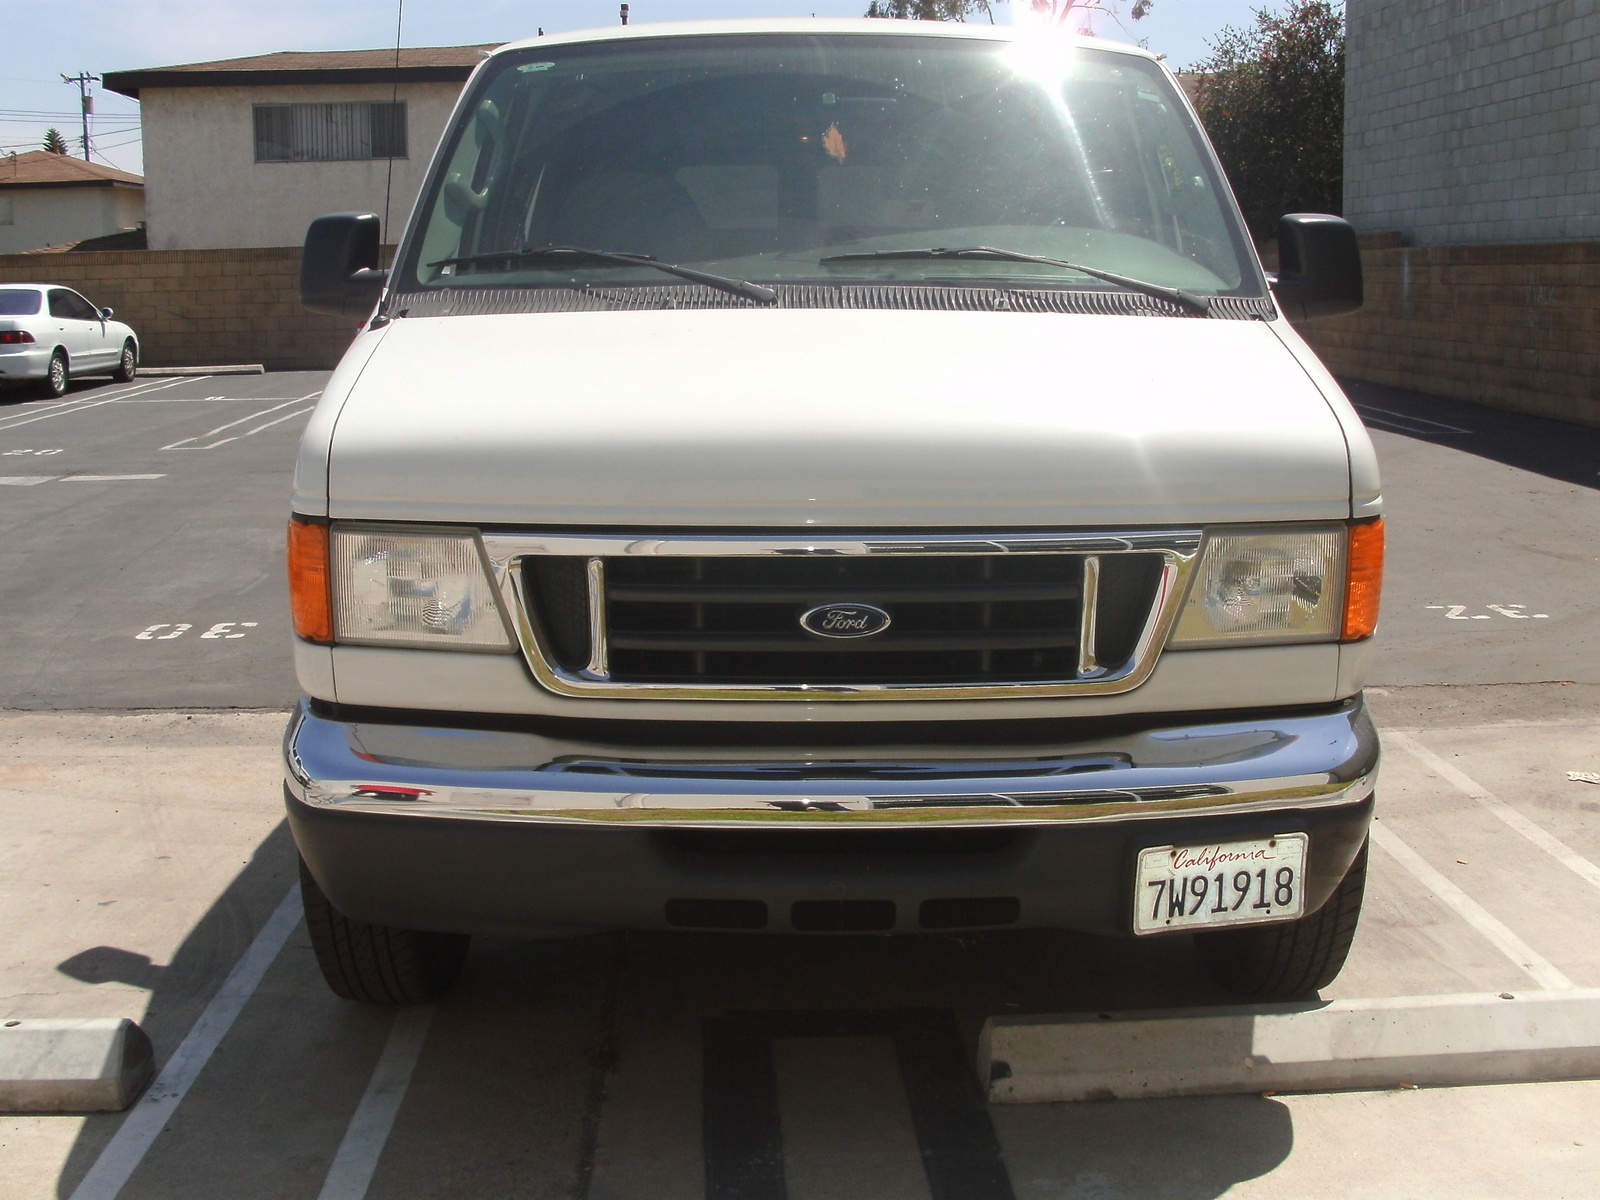 2006 Econoline ford review wagon #7